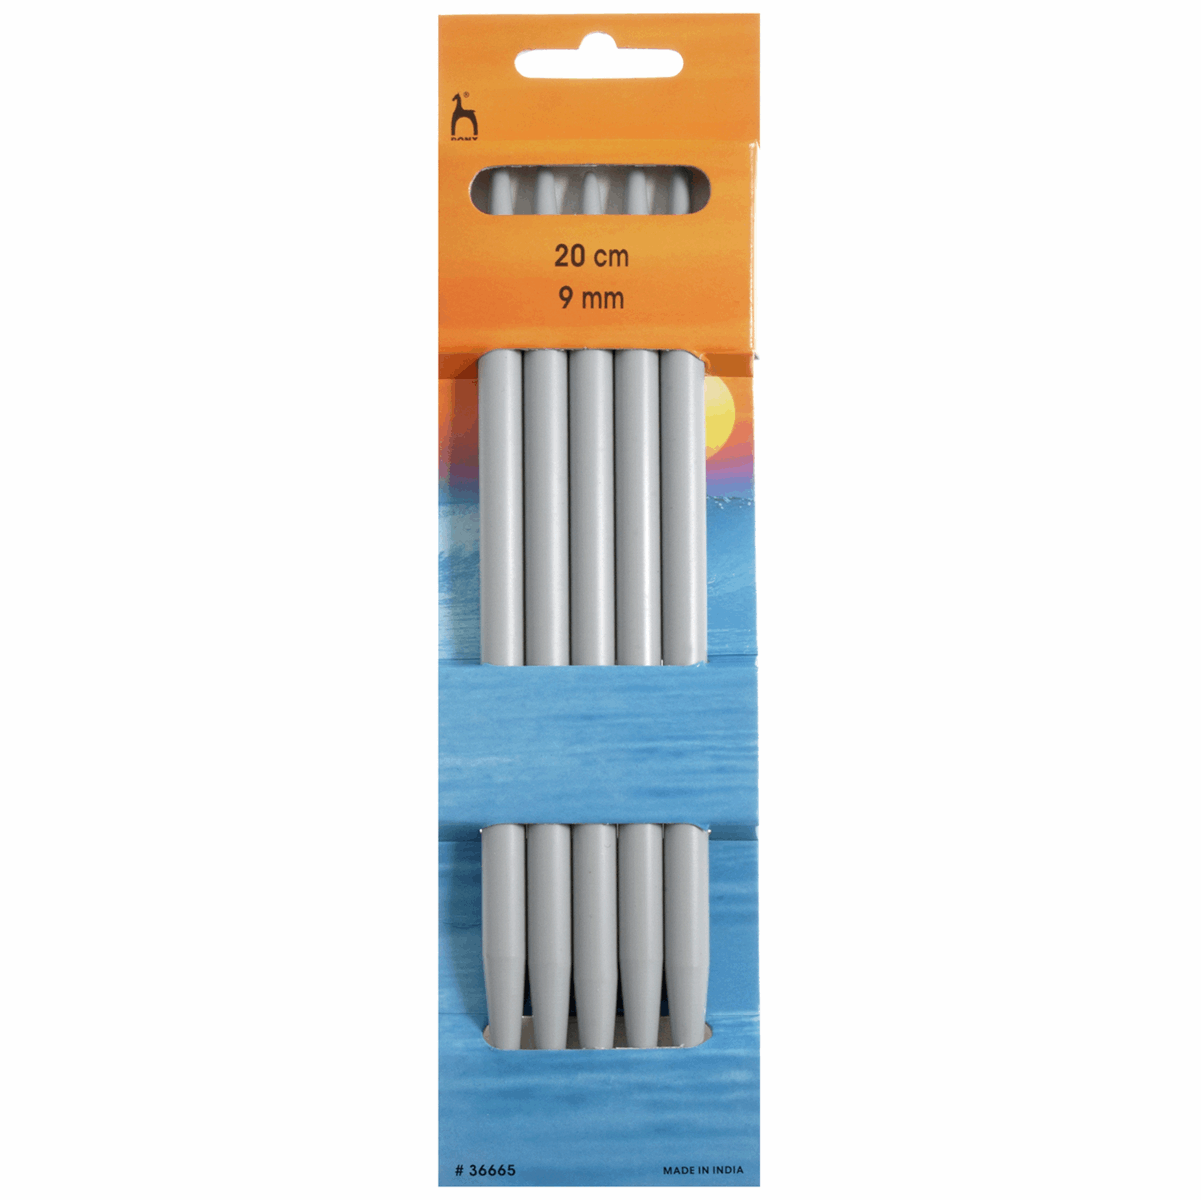 PONY Double-Ended Knitting Pins - 20cm x 9mm (Set of 5)